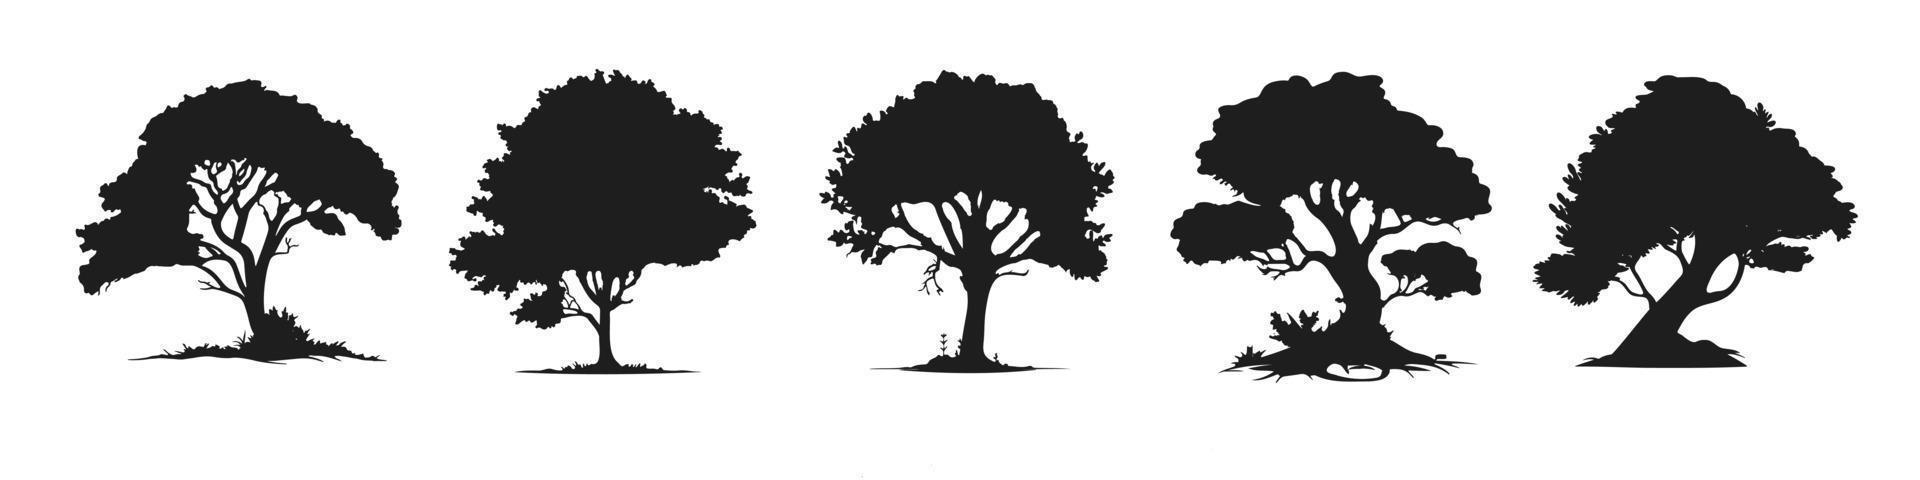 set of tree silhouettes isolated on white background vector